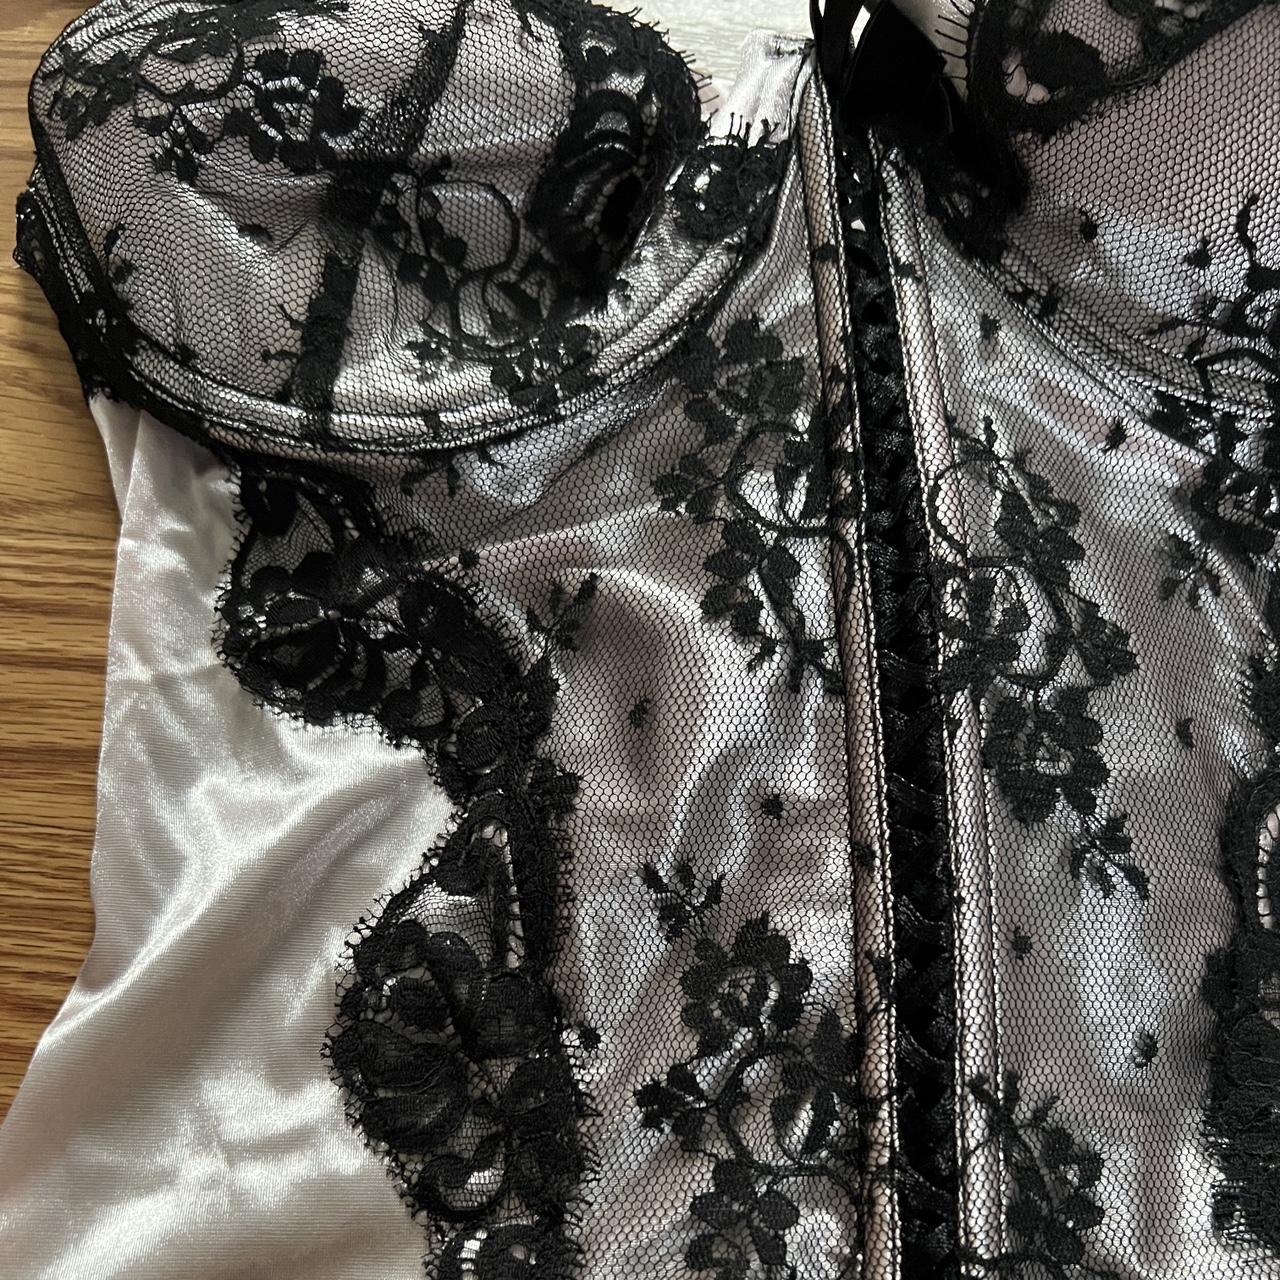 NWOT Beautiful Light Pink and Black Lace Corset SO - Depop